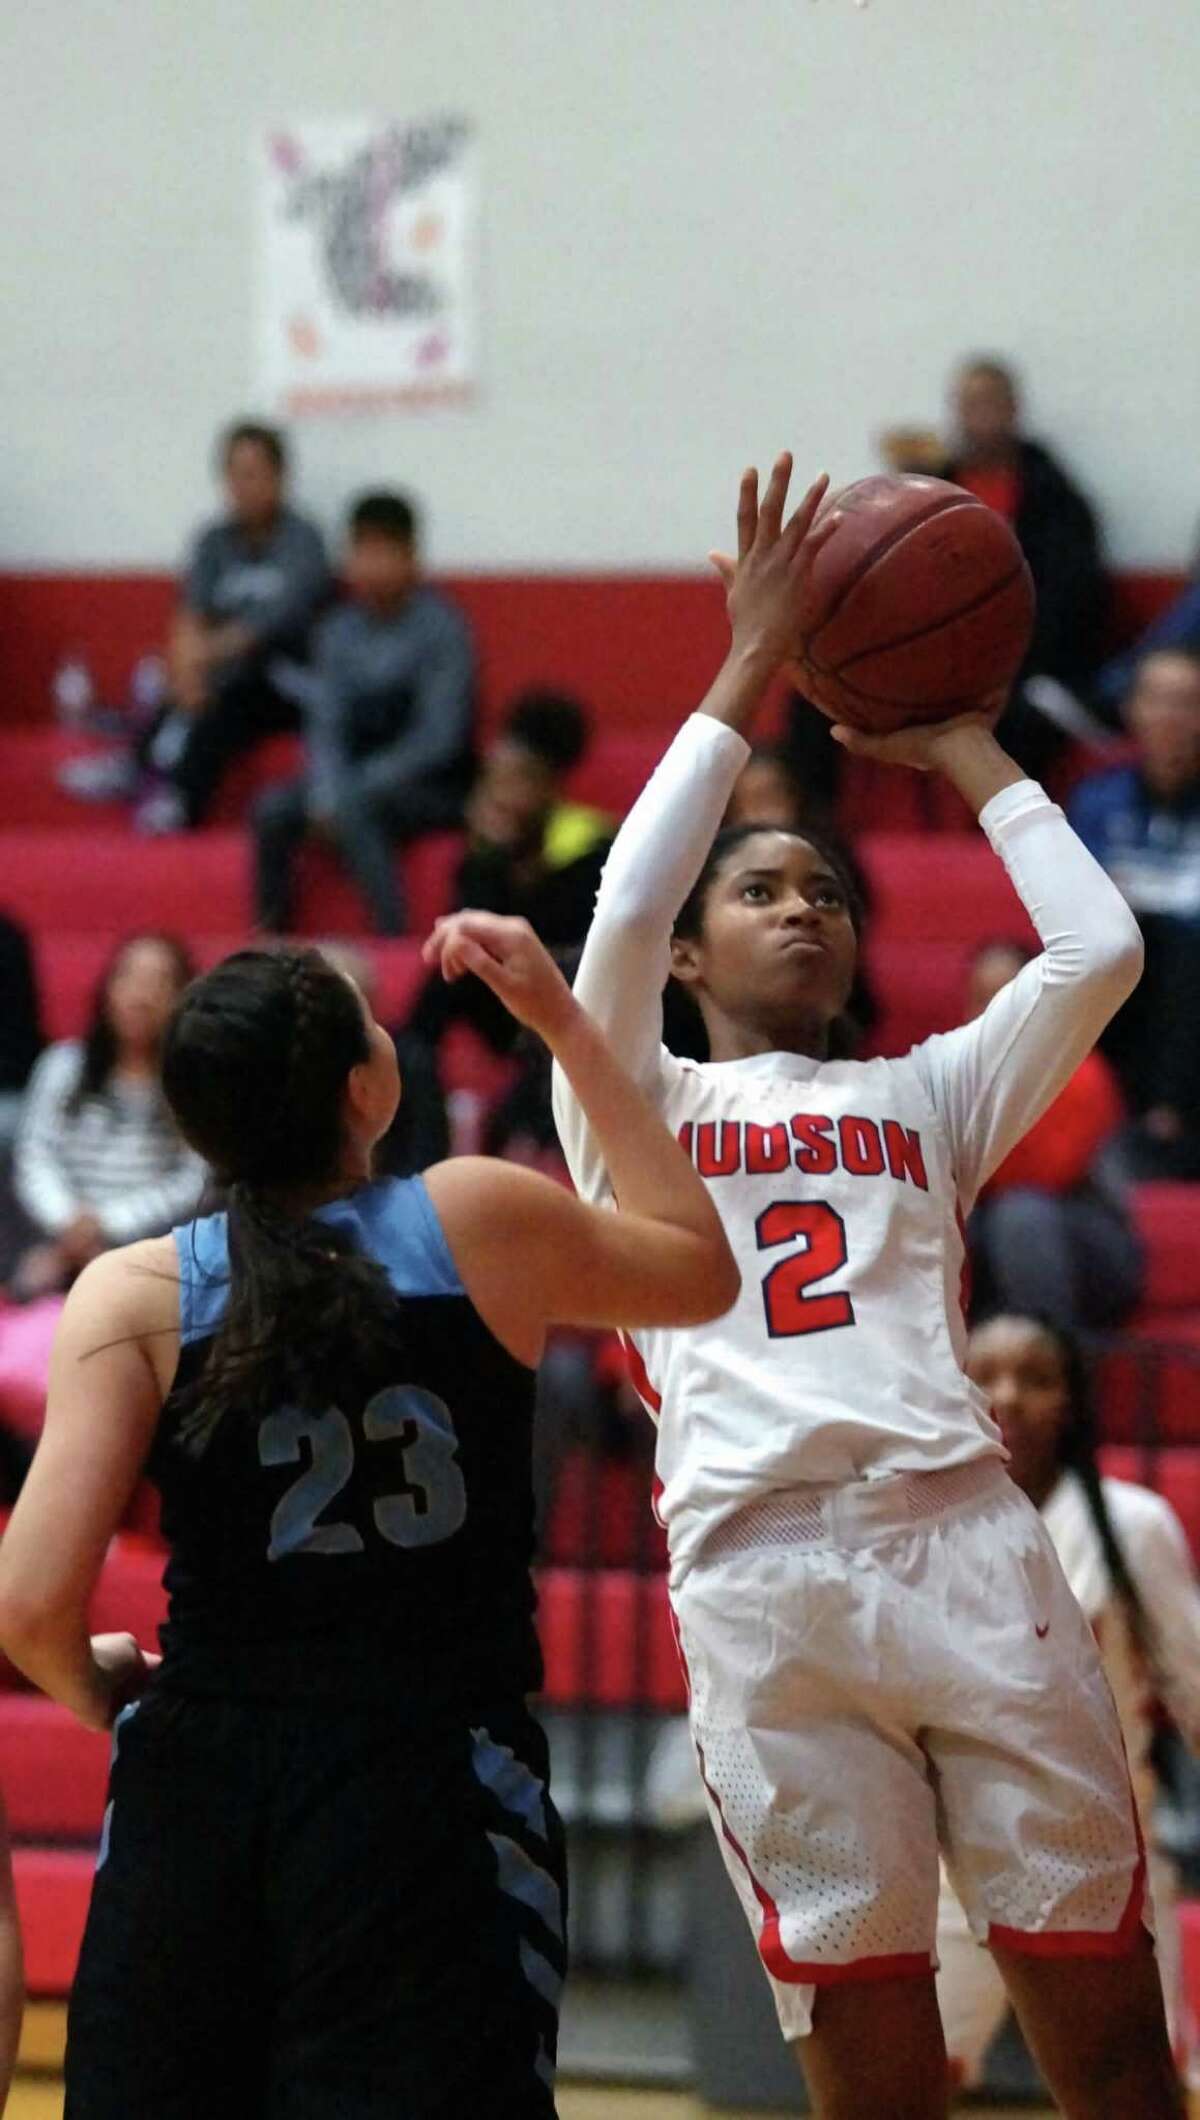 Judson’s Teanna Huggins (2) goes over Laredo United South’s Millie Hernandez during Judson’s 38-23 home win to open their 2019 season.